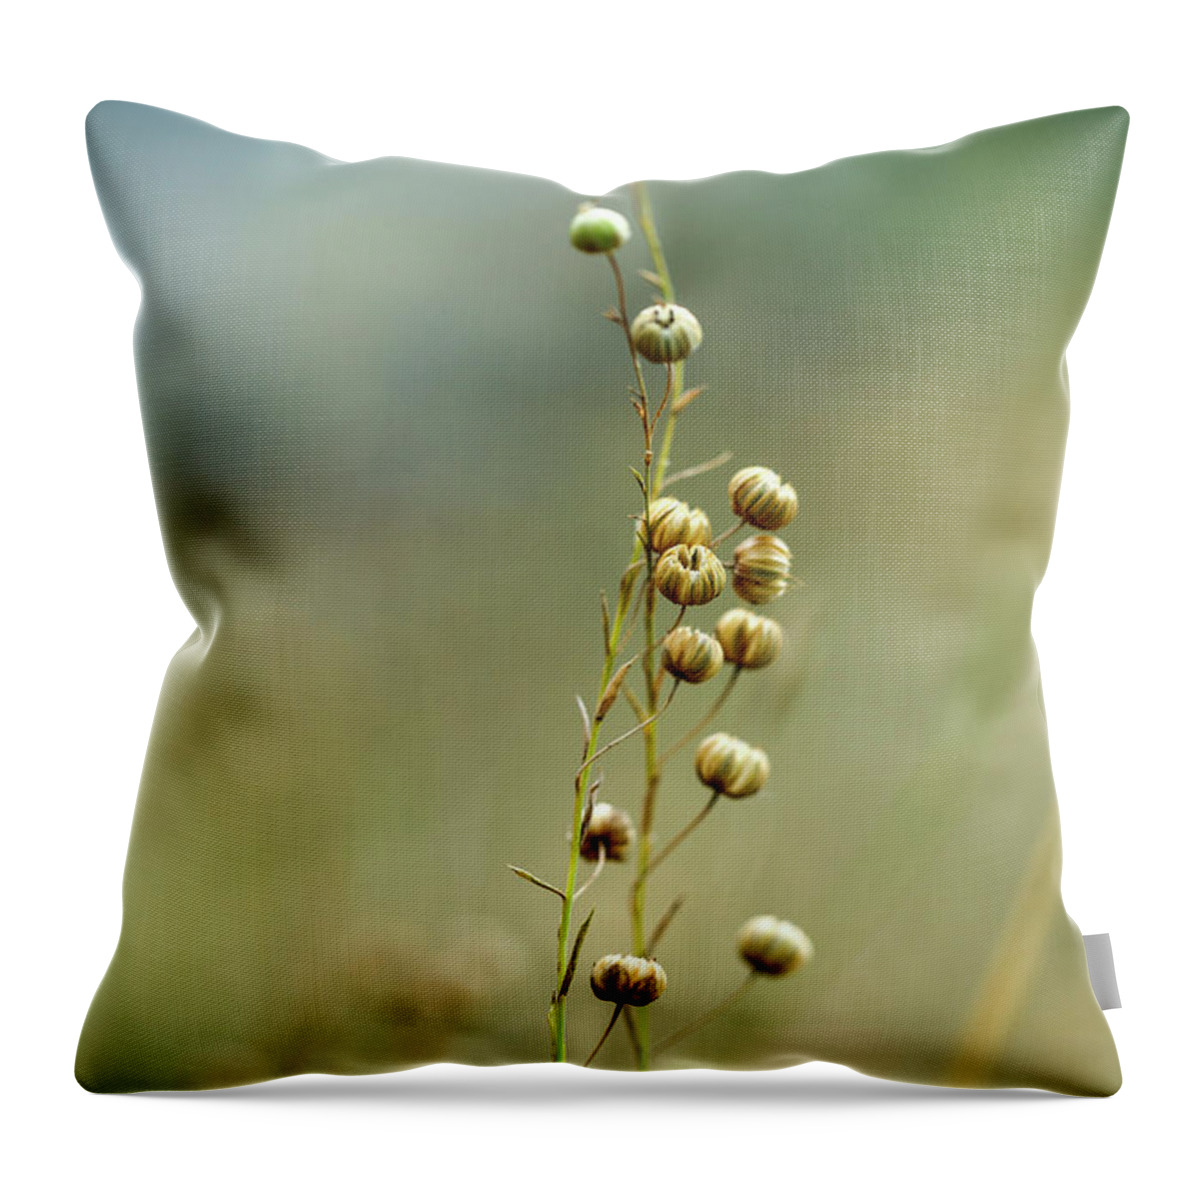 Flower Throw Pillow featuring the photograph Summer Meadow by Nailia Schwarz